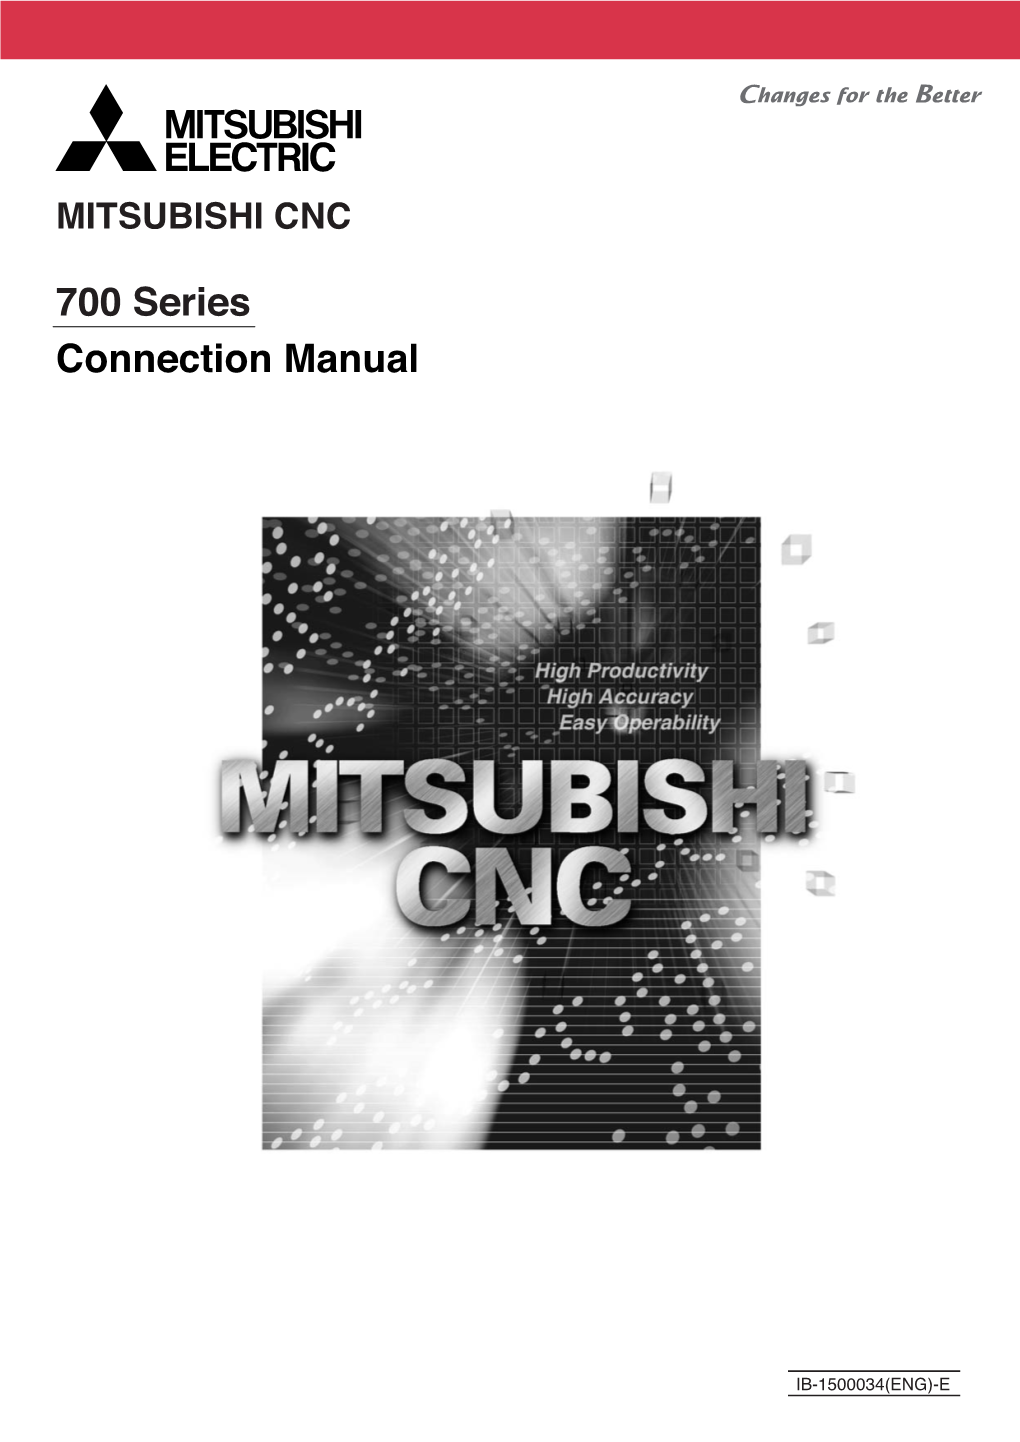 700 Series CONNECTION MANUAL and Covers the Items Related to Installation, Connection and Maintenance of This NC Unit